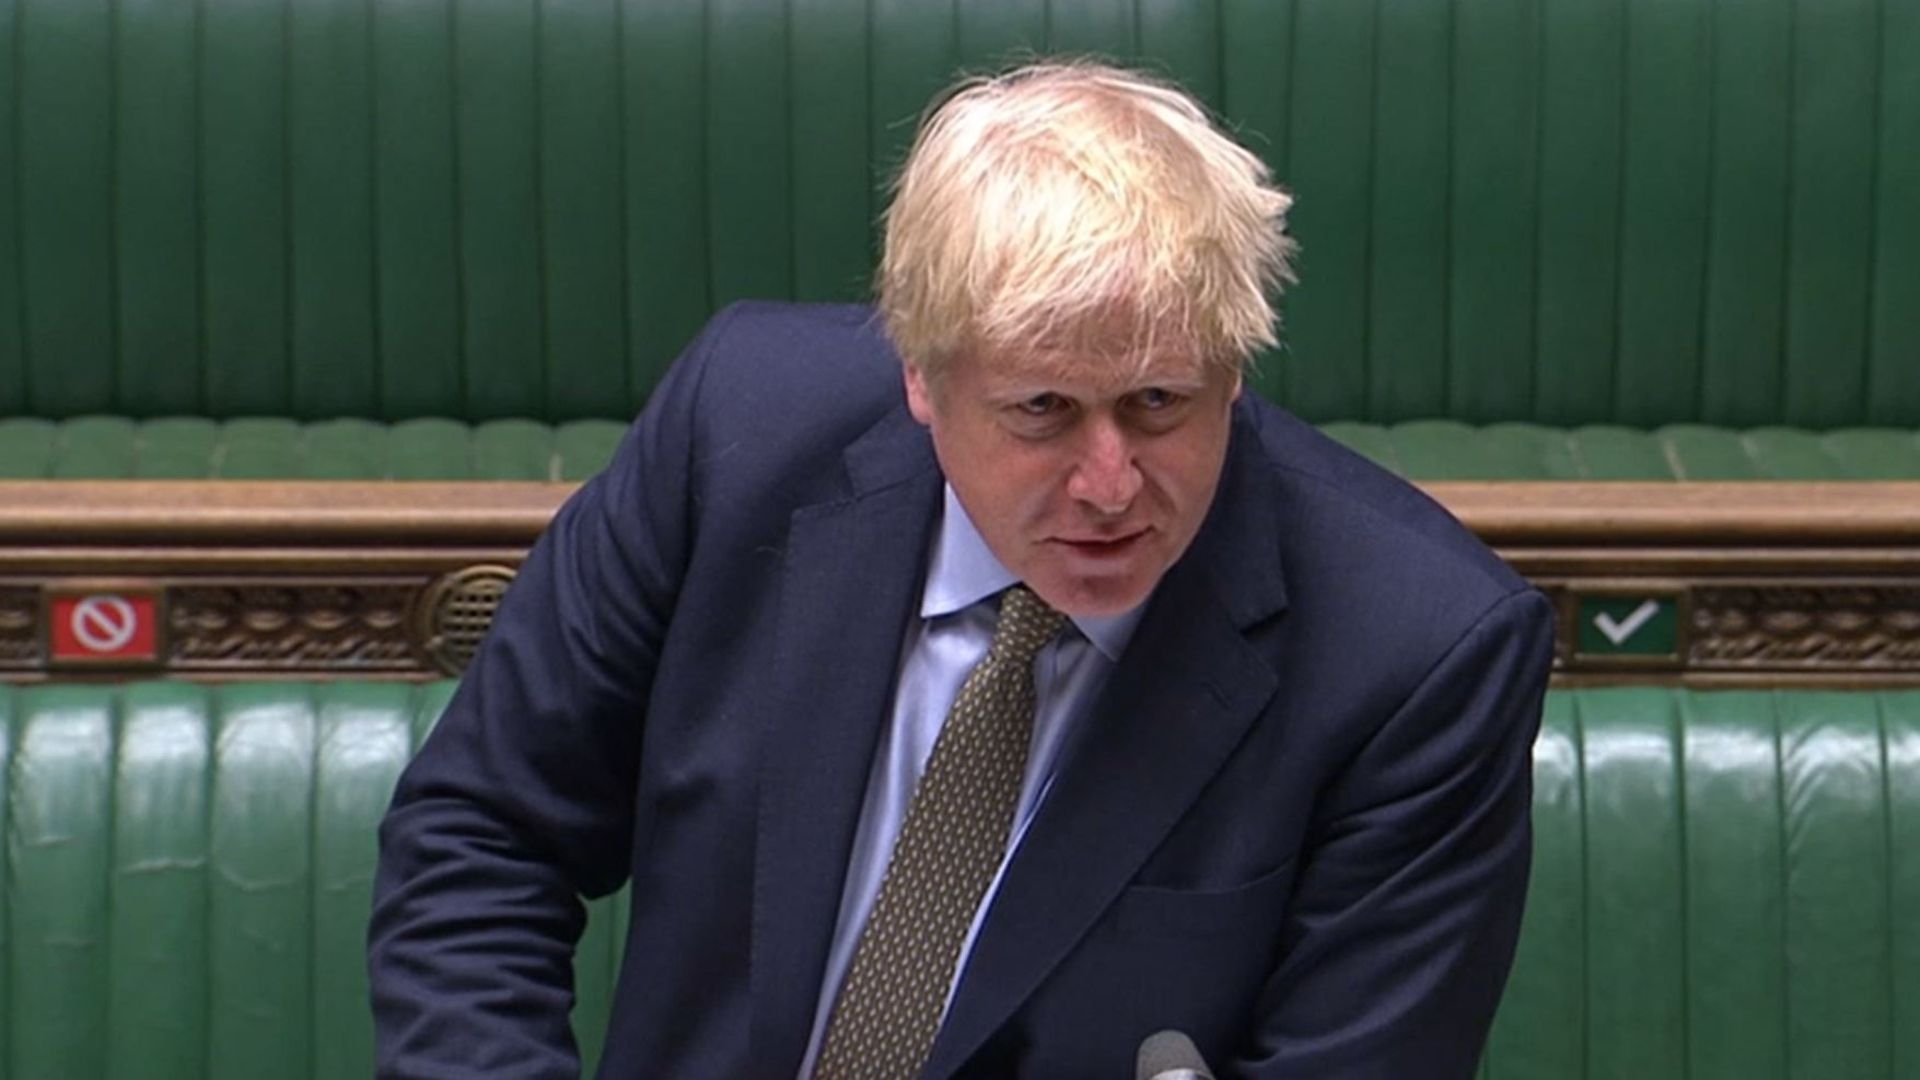 Prime Minister Boris Johnson speaks in the House of Commons - Credit: PA